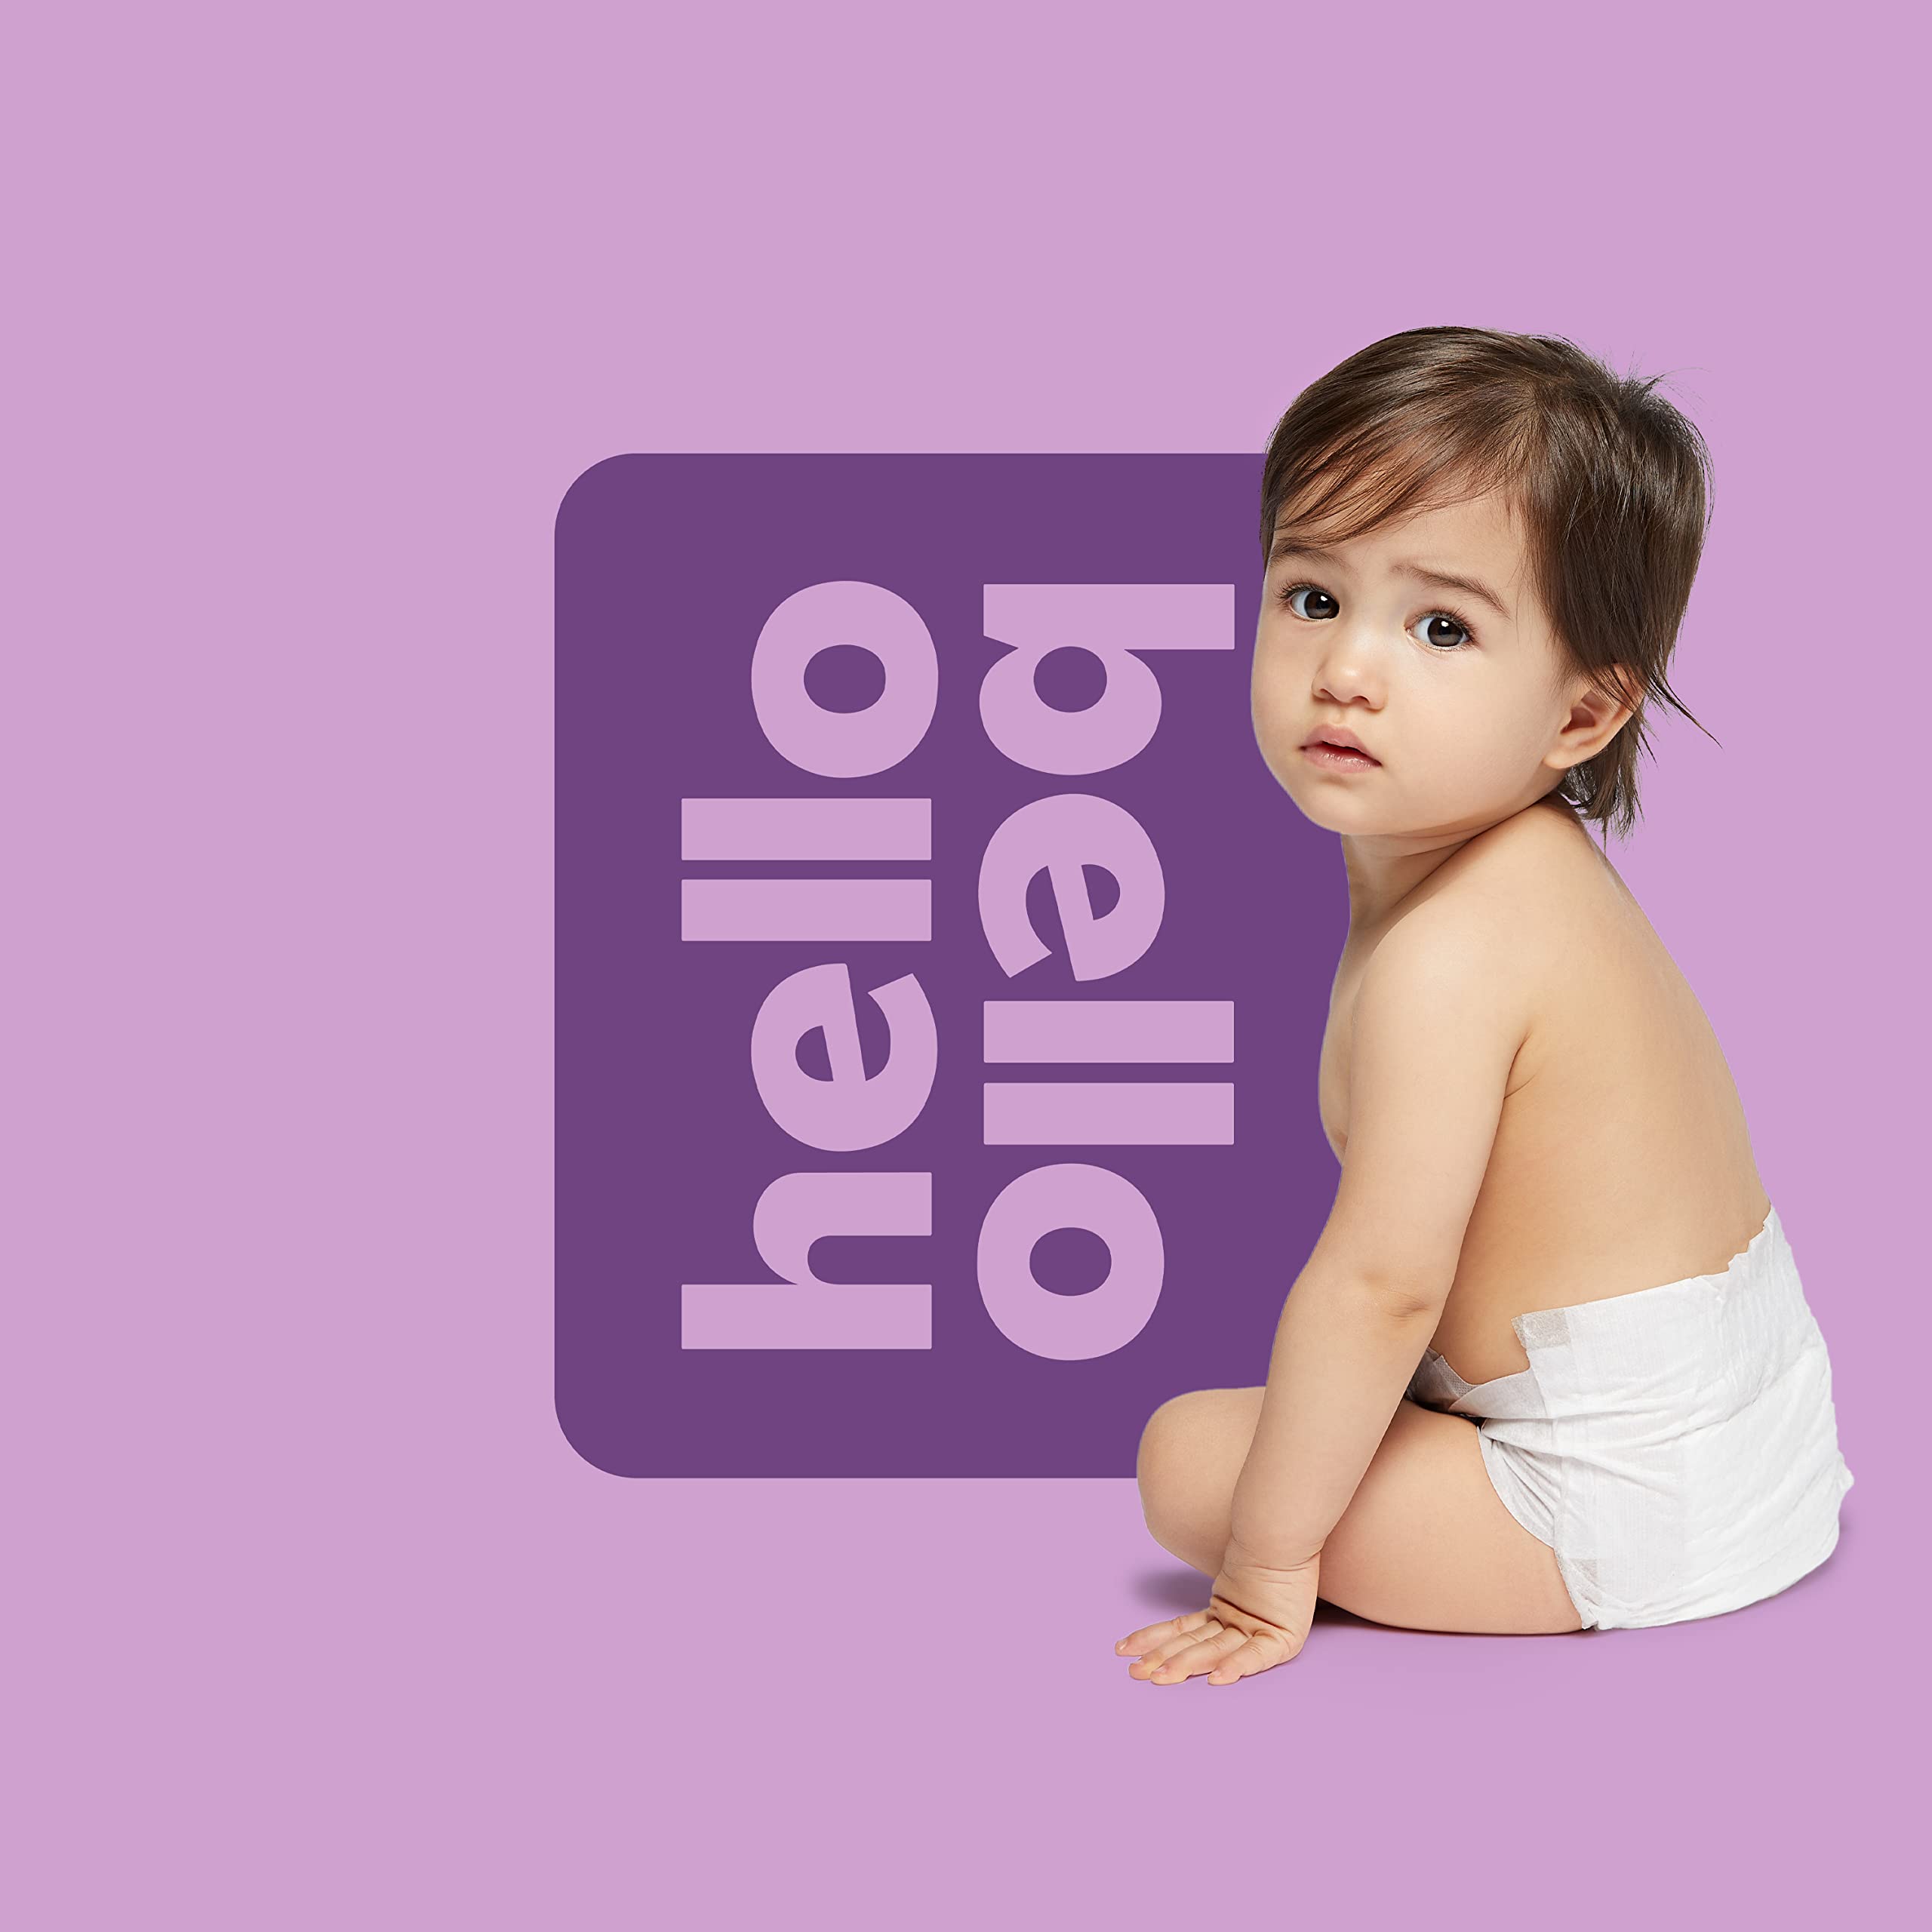 Hello Bello Premium Baby Diapers Size 6 I 17 Count of Disposeable, Extra-Absorbent, Hypoallergenic, and Eco-Friendly Baby Diapers with Snug and Comfort Fit I Safari